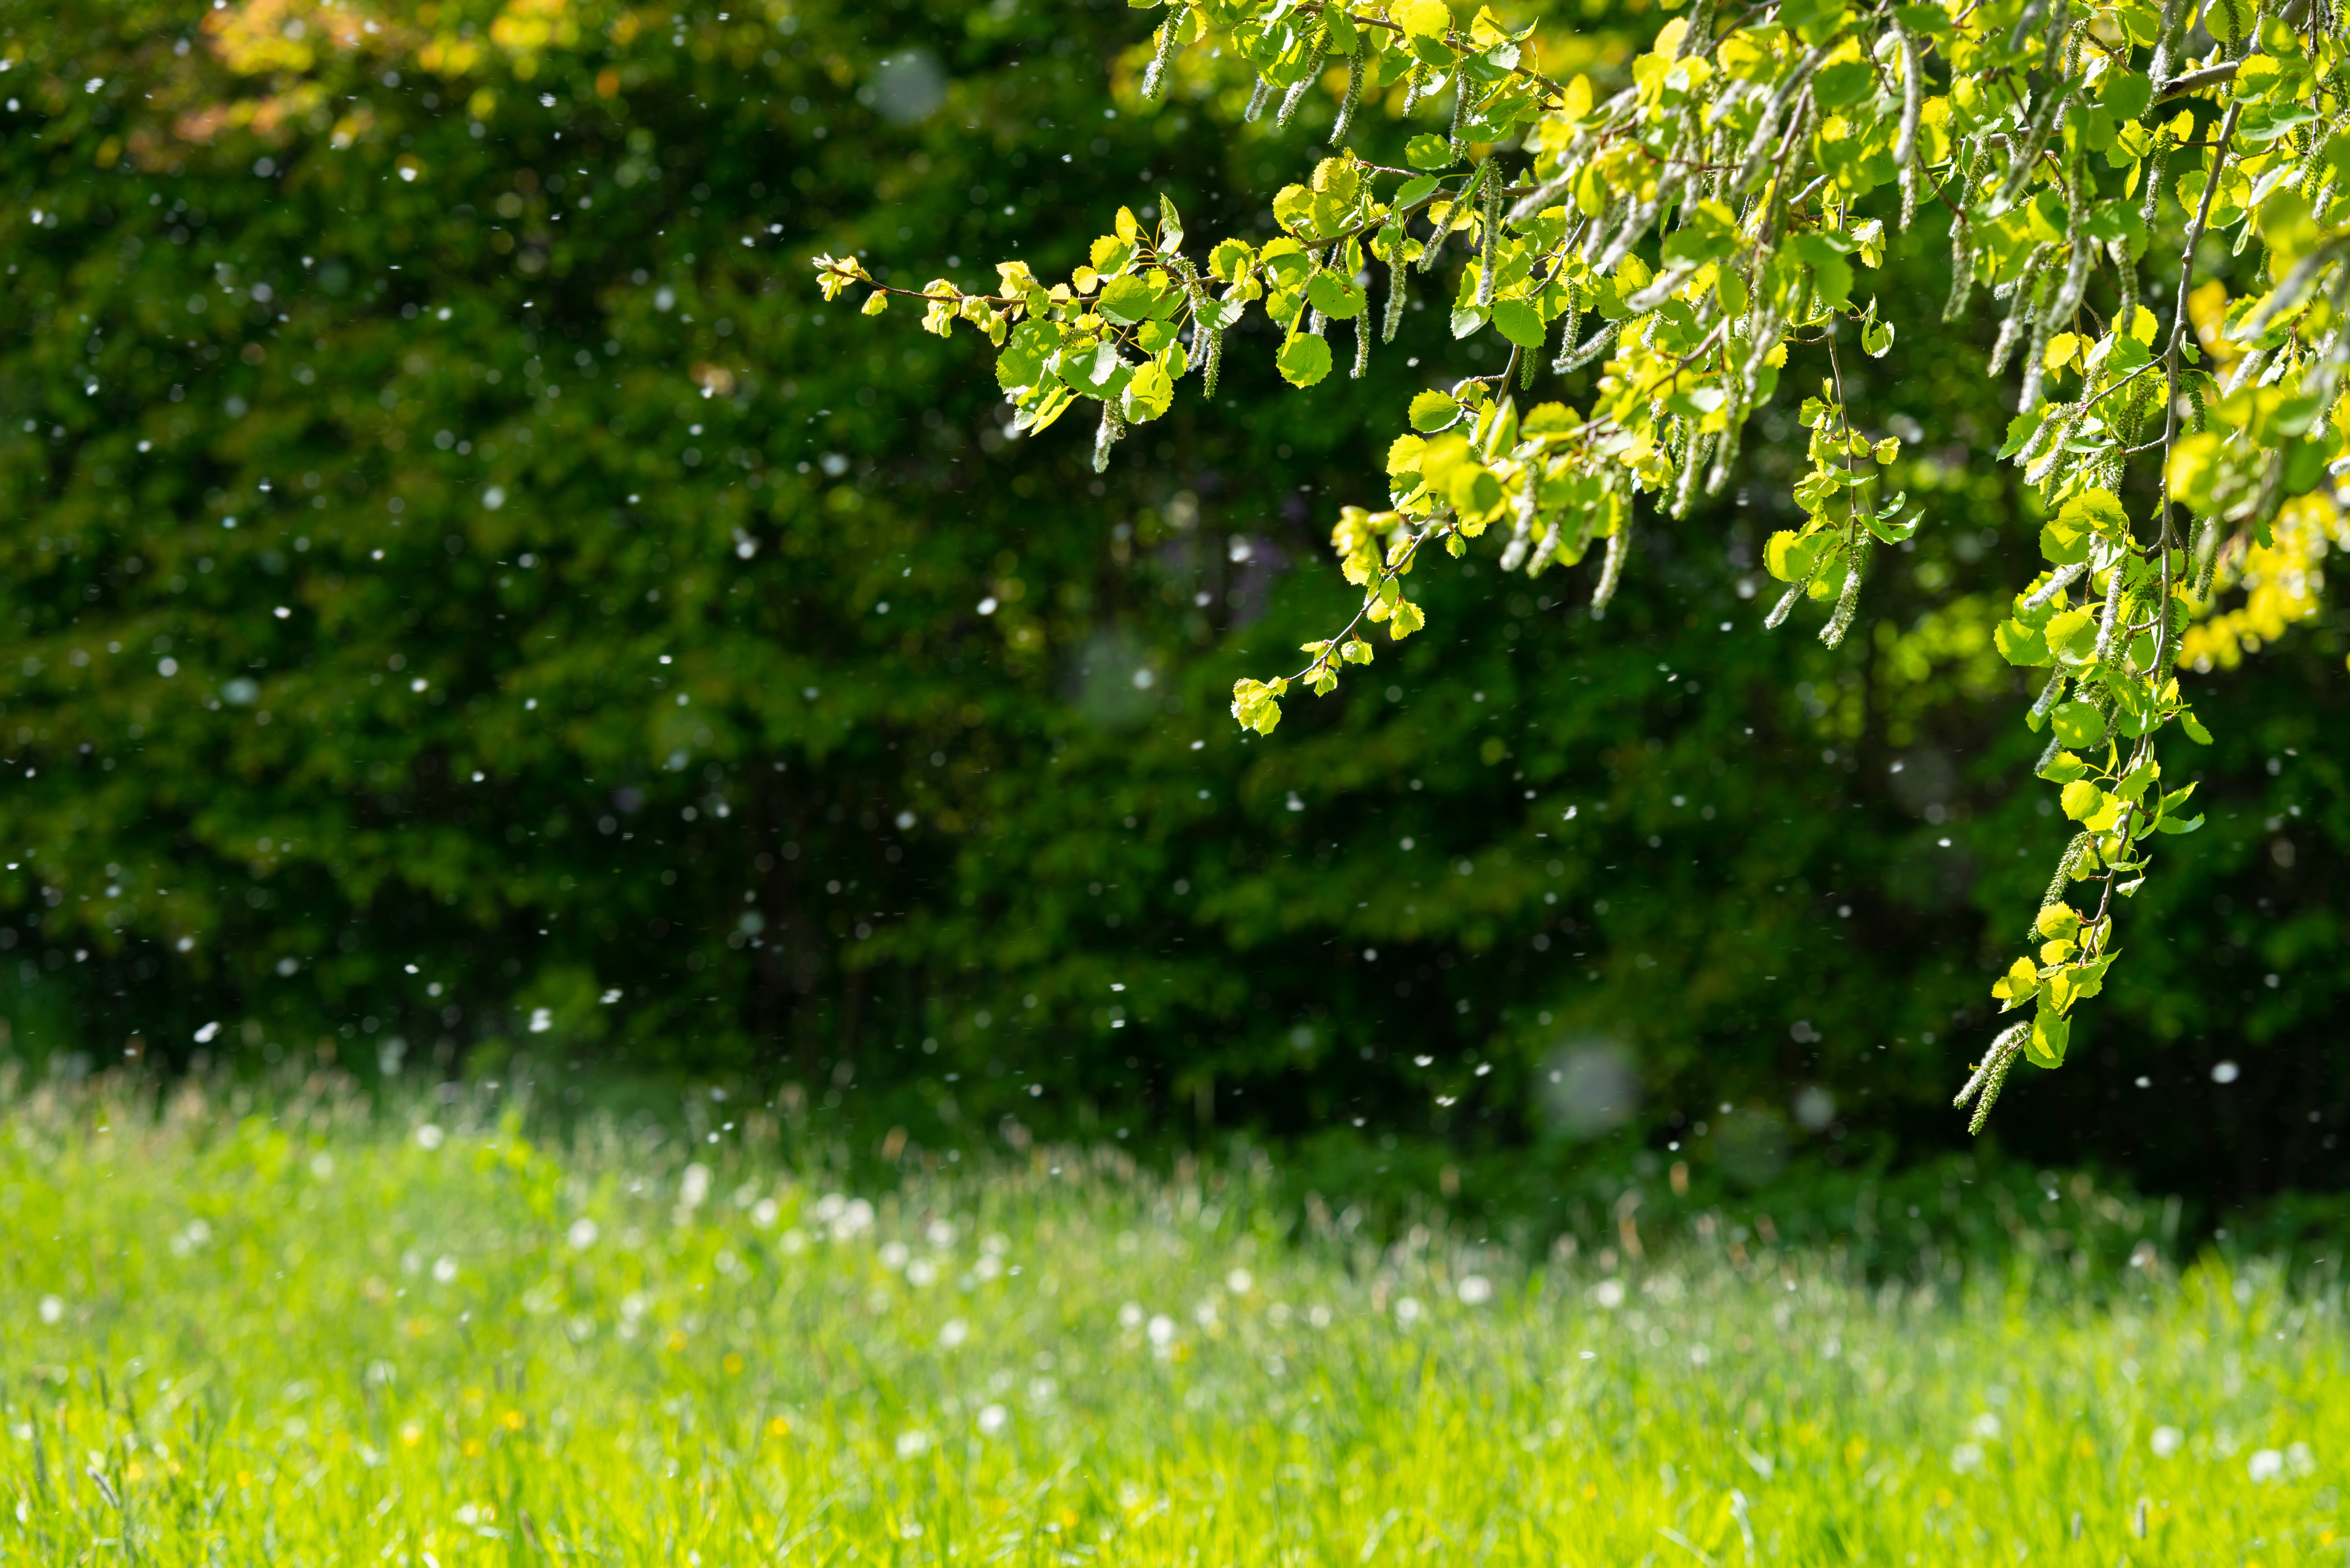 Hay fever affects almost 10 million people in England